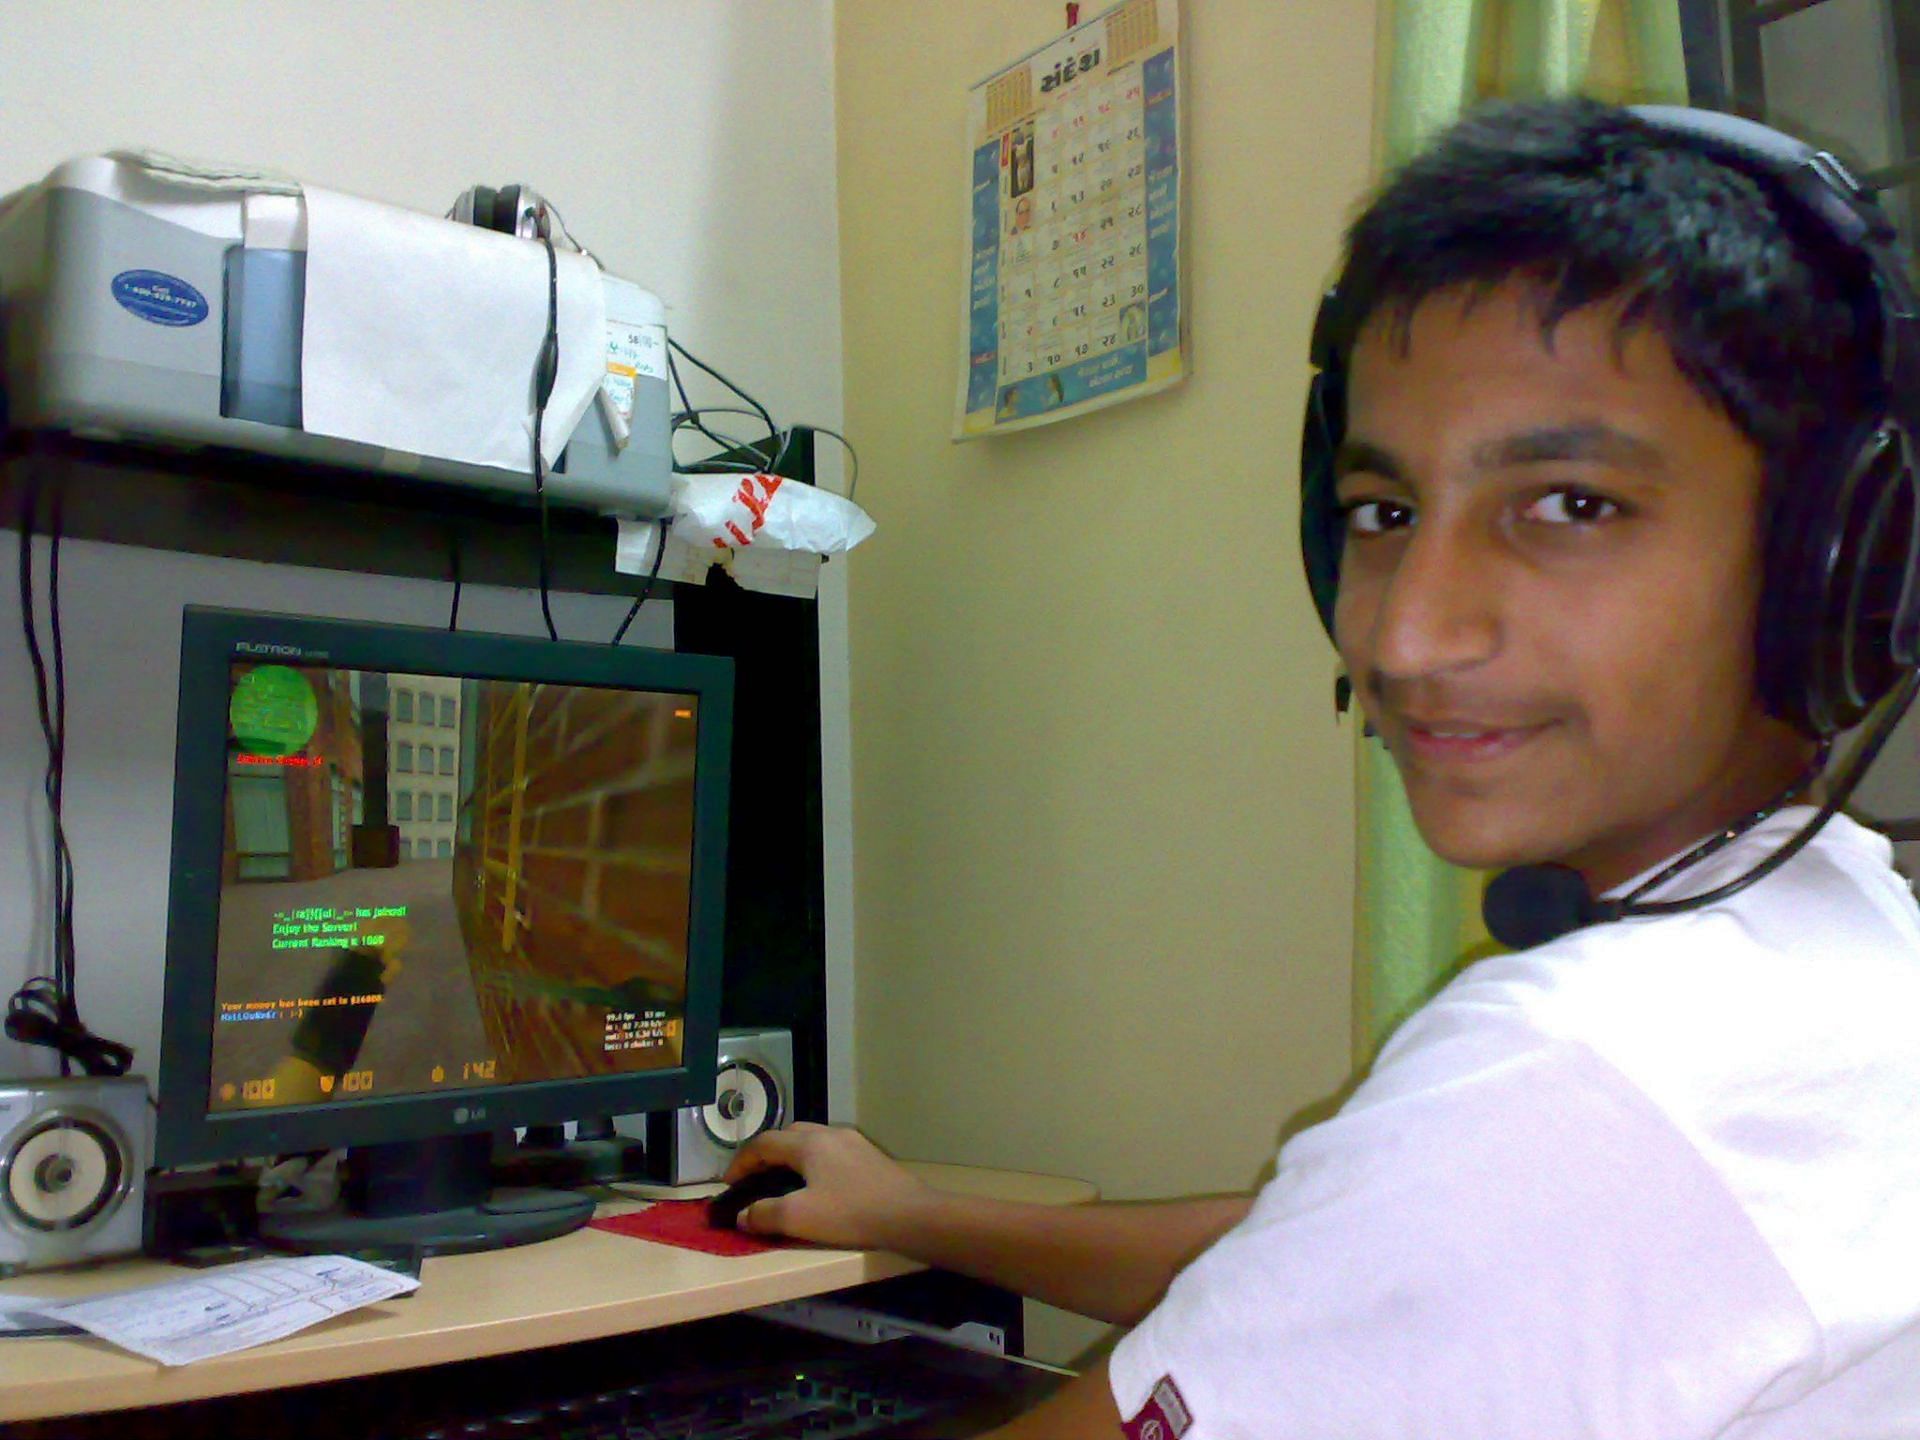 MambaSR was into gaming from a very young age (Image via Ranjit Patel)